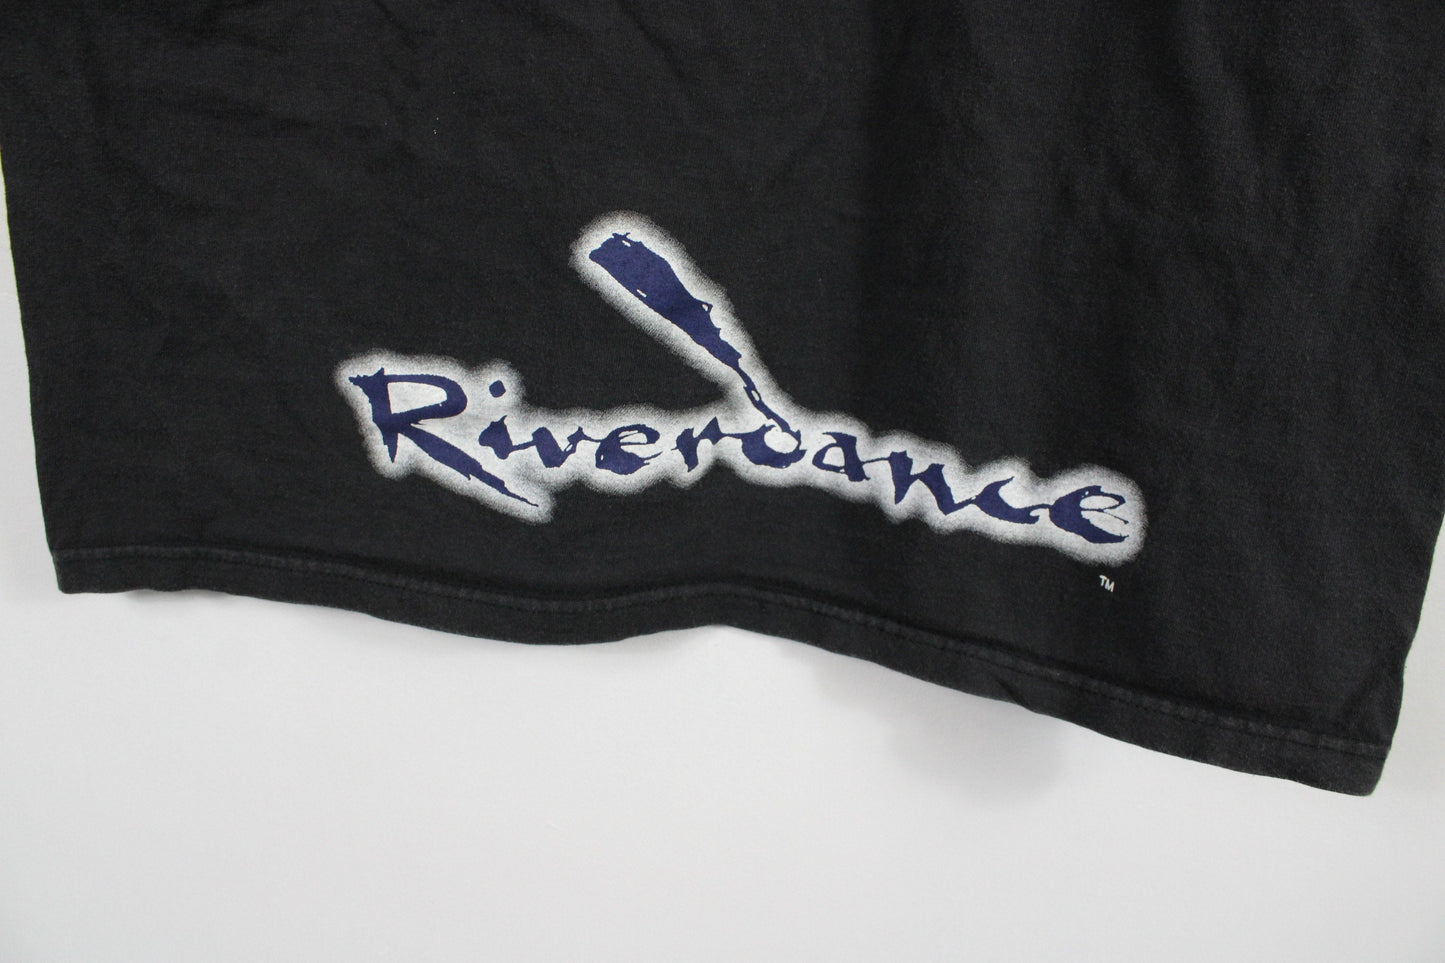 River-Dance T-Shirt / Vintage Graphic Tee Shirt / Hanes Heavy-Weight / 90s Clothing